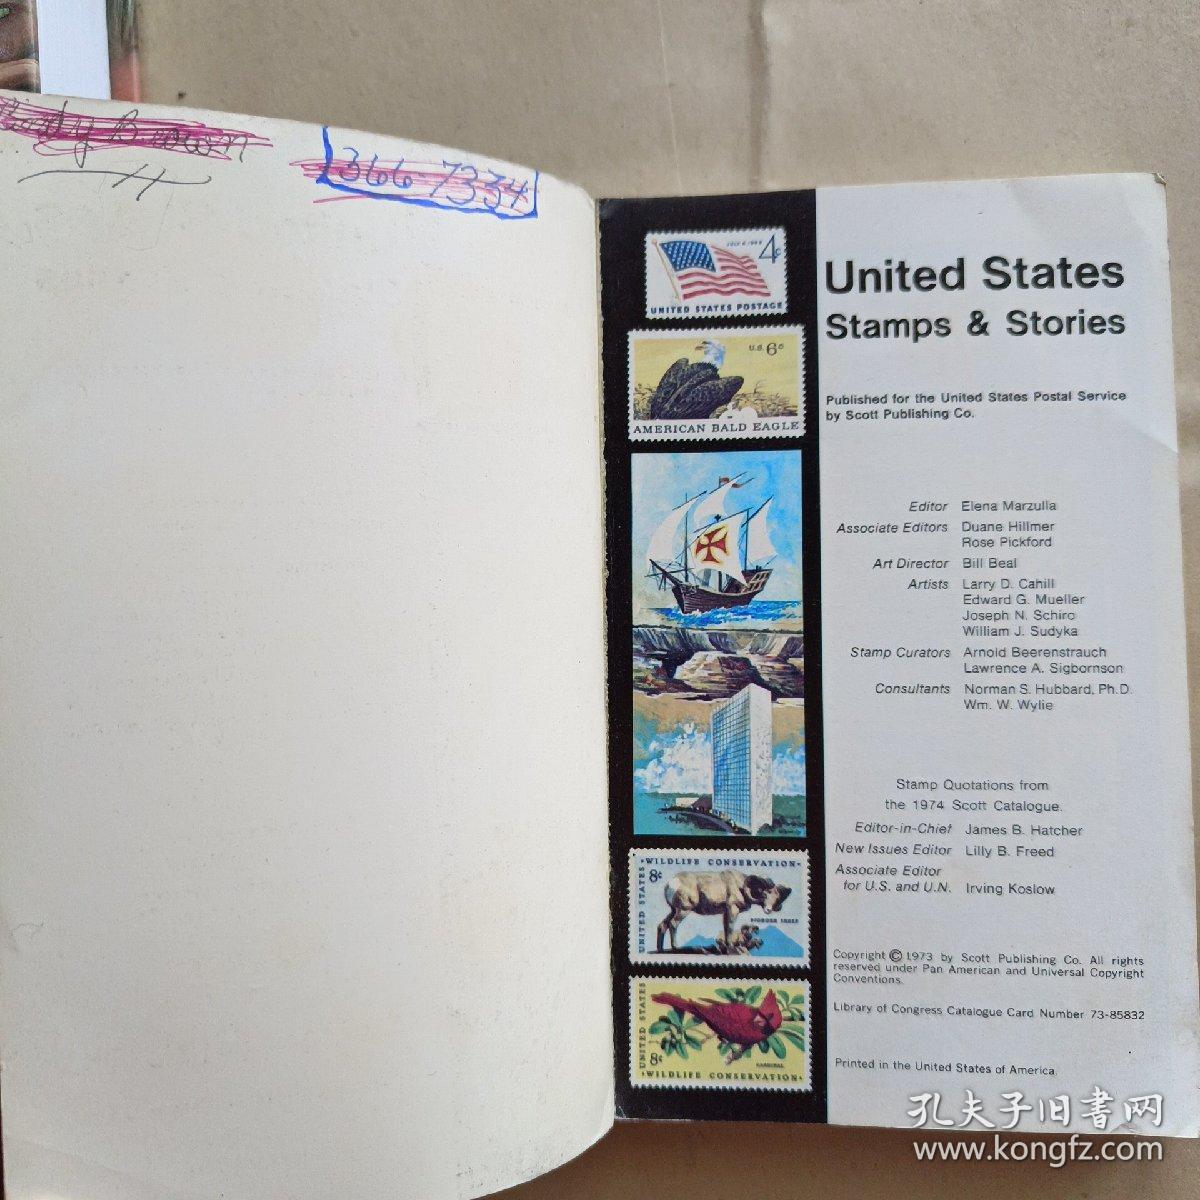 United States Stamps & Stories